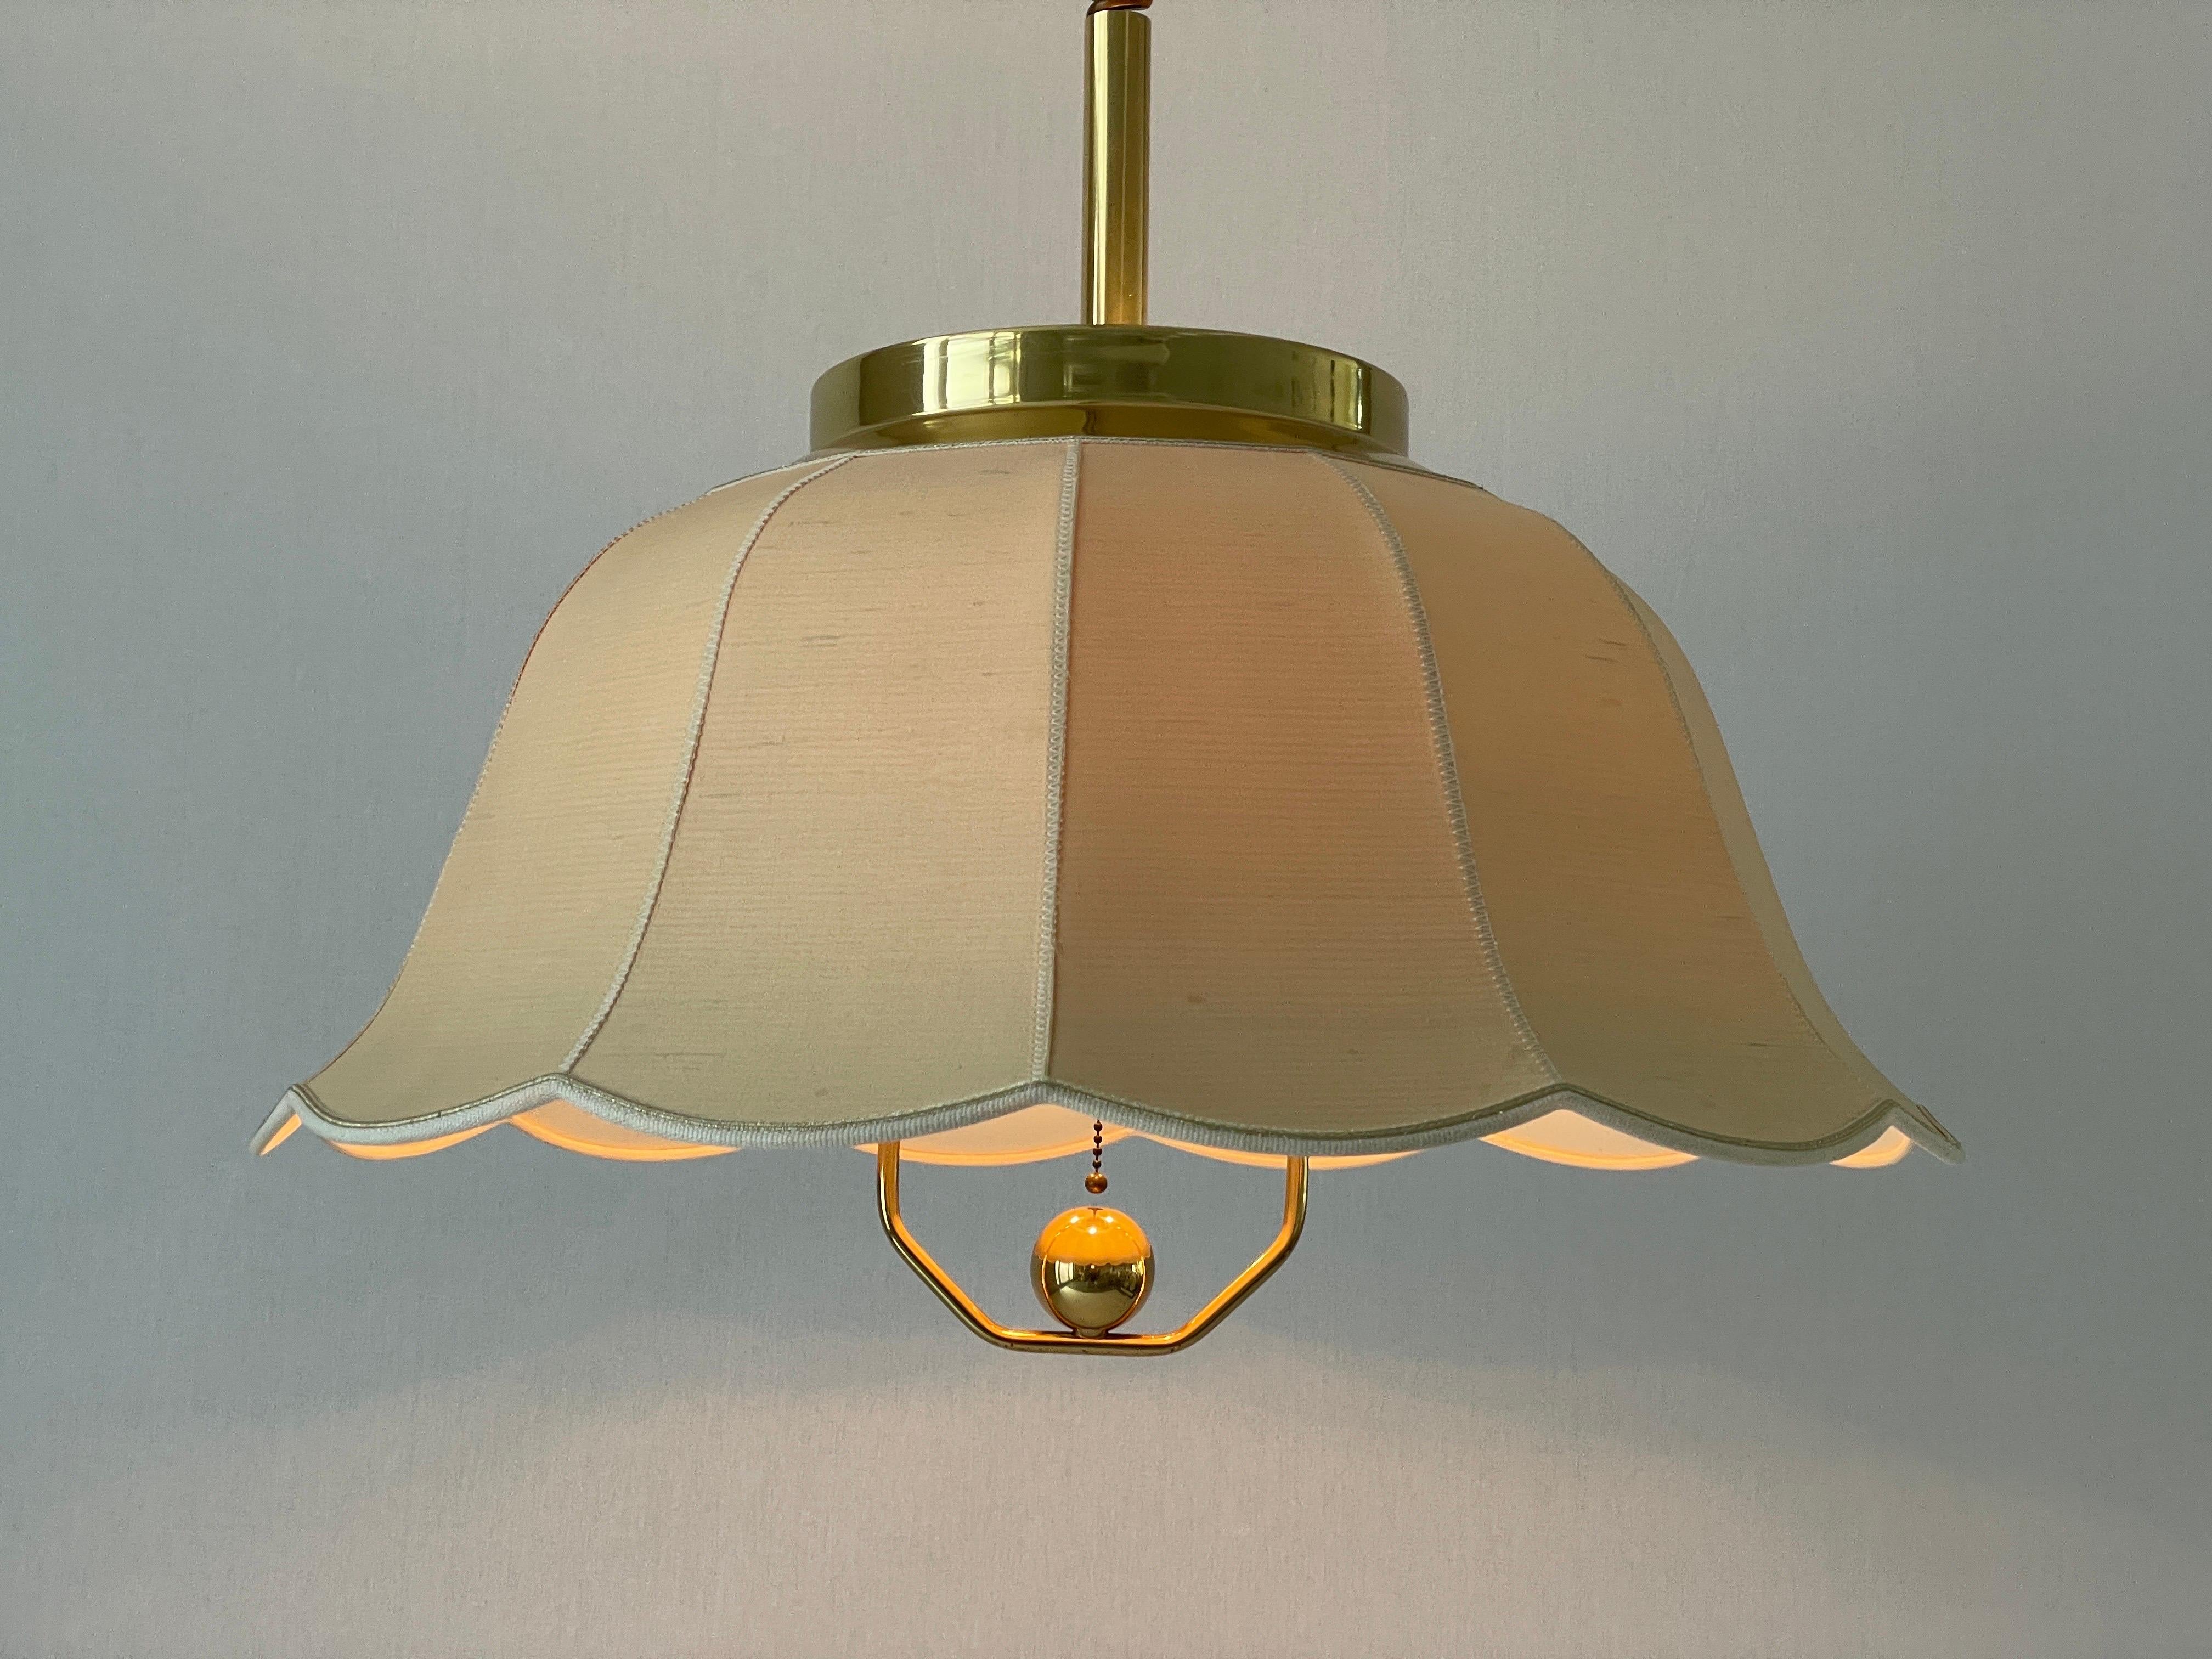 Fabric and Brass 5 socket Adjustable Shade Pendant Lamp by WKR, 1970s, Germany For Sale 5